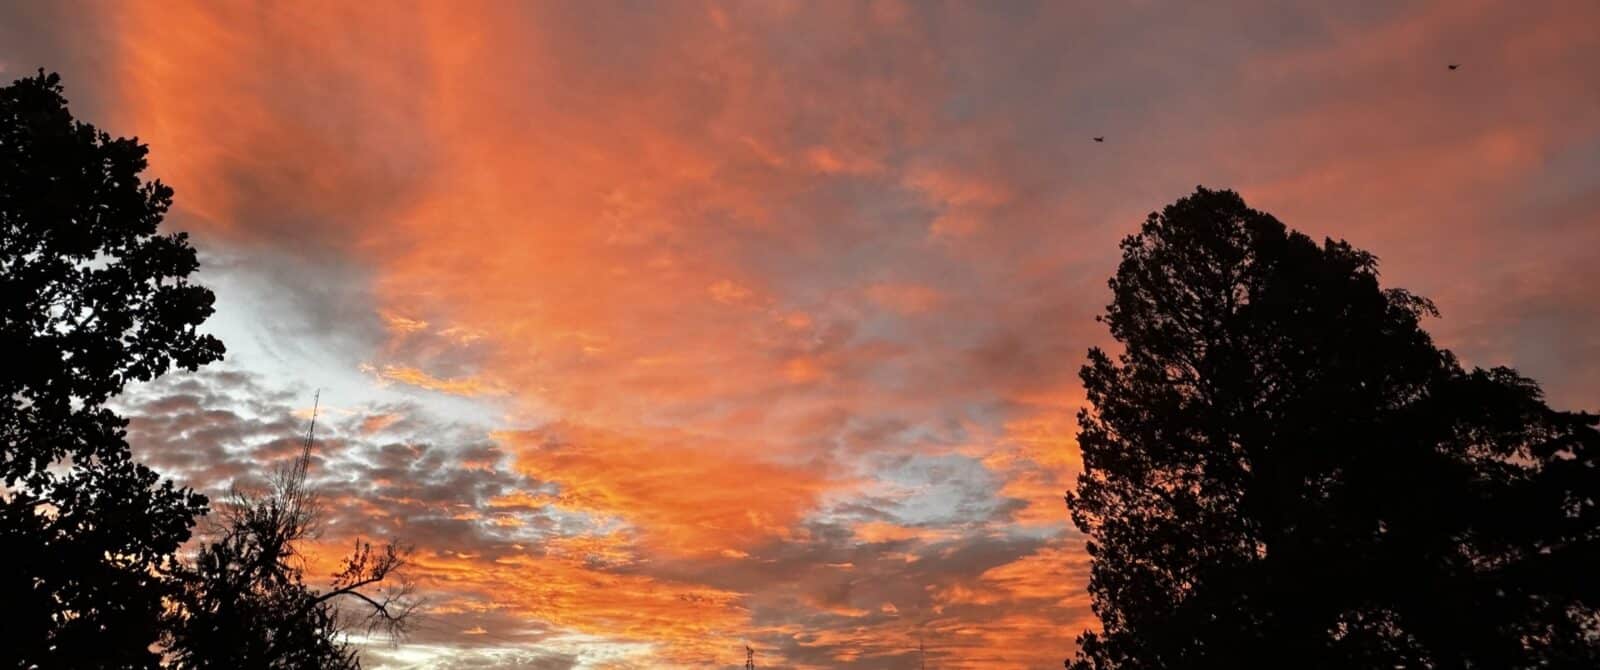 orange sky at sunrise with trees showing on the left and right of the picture